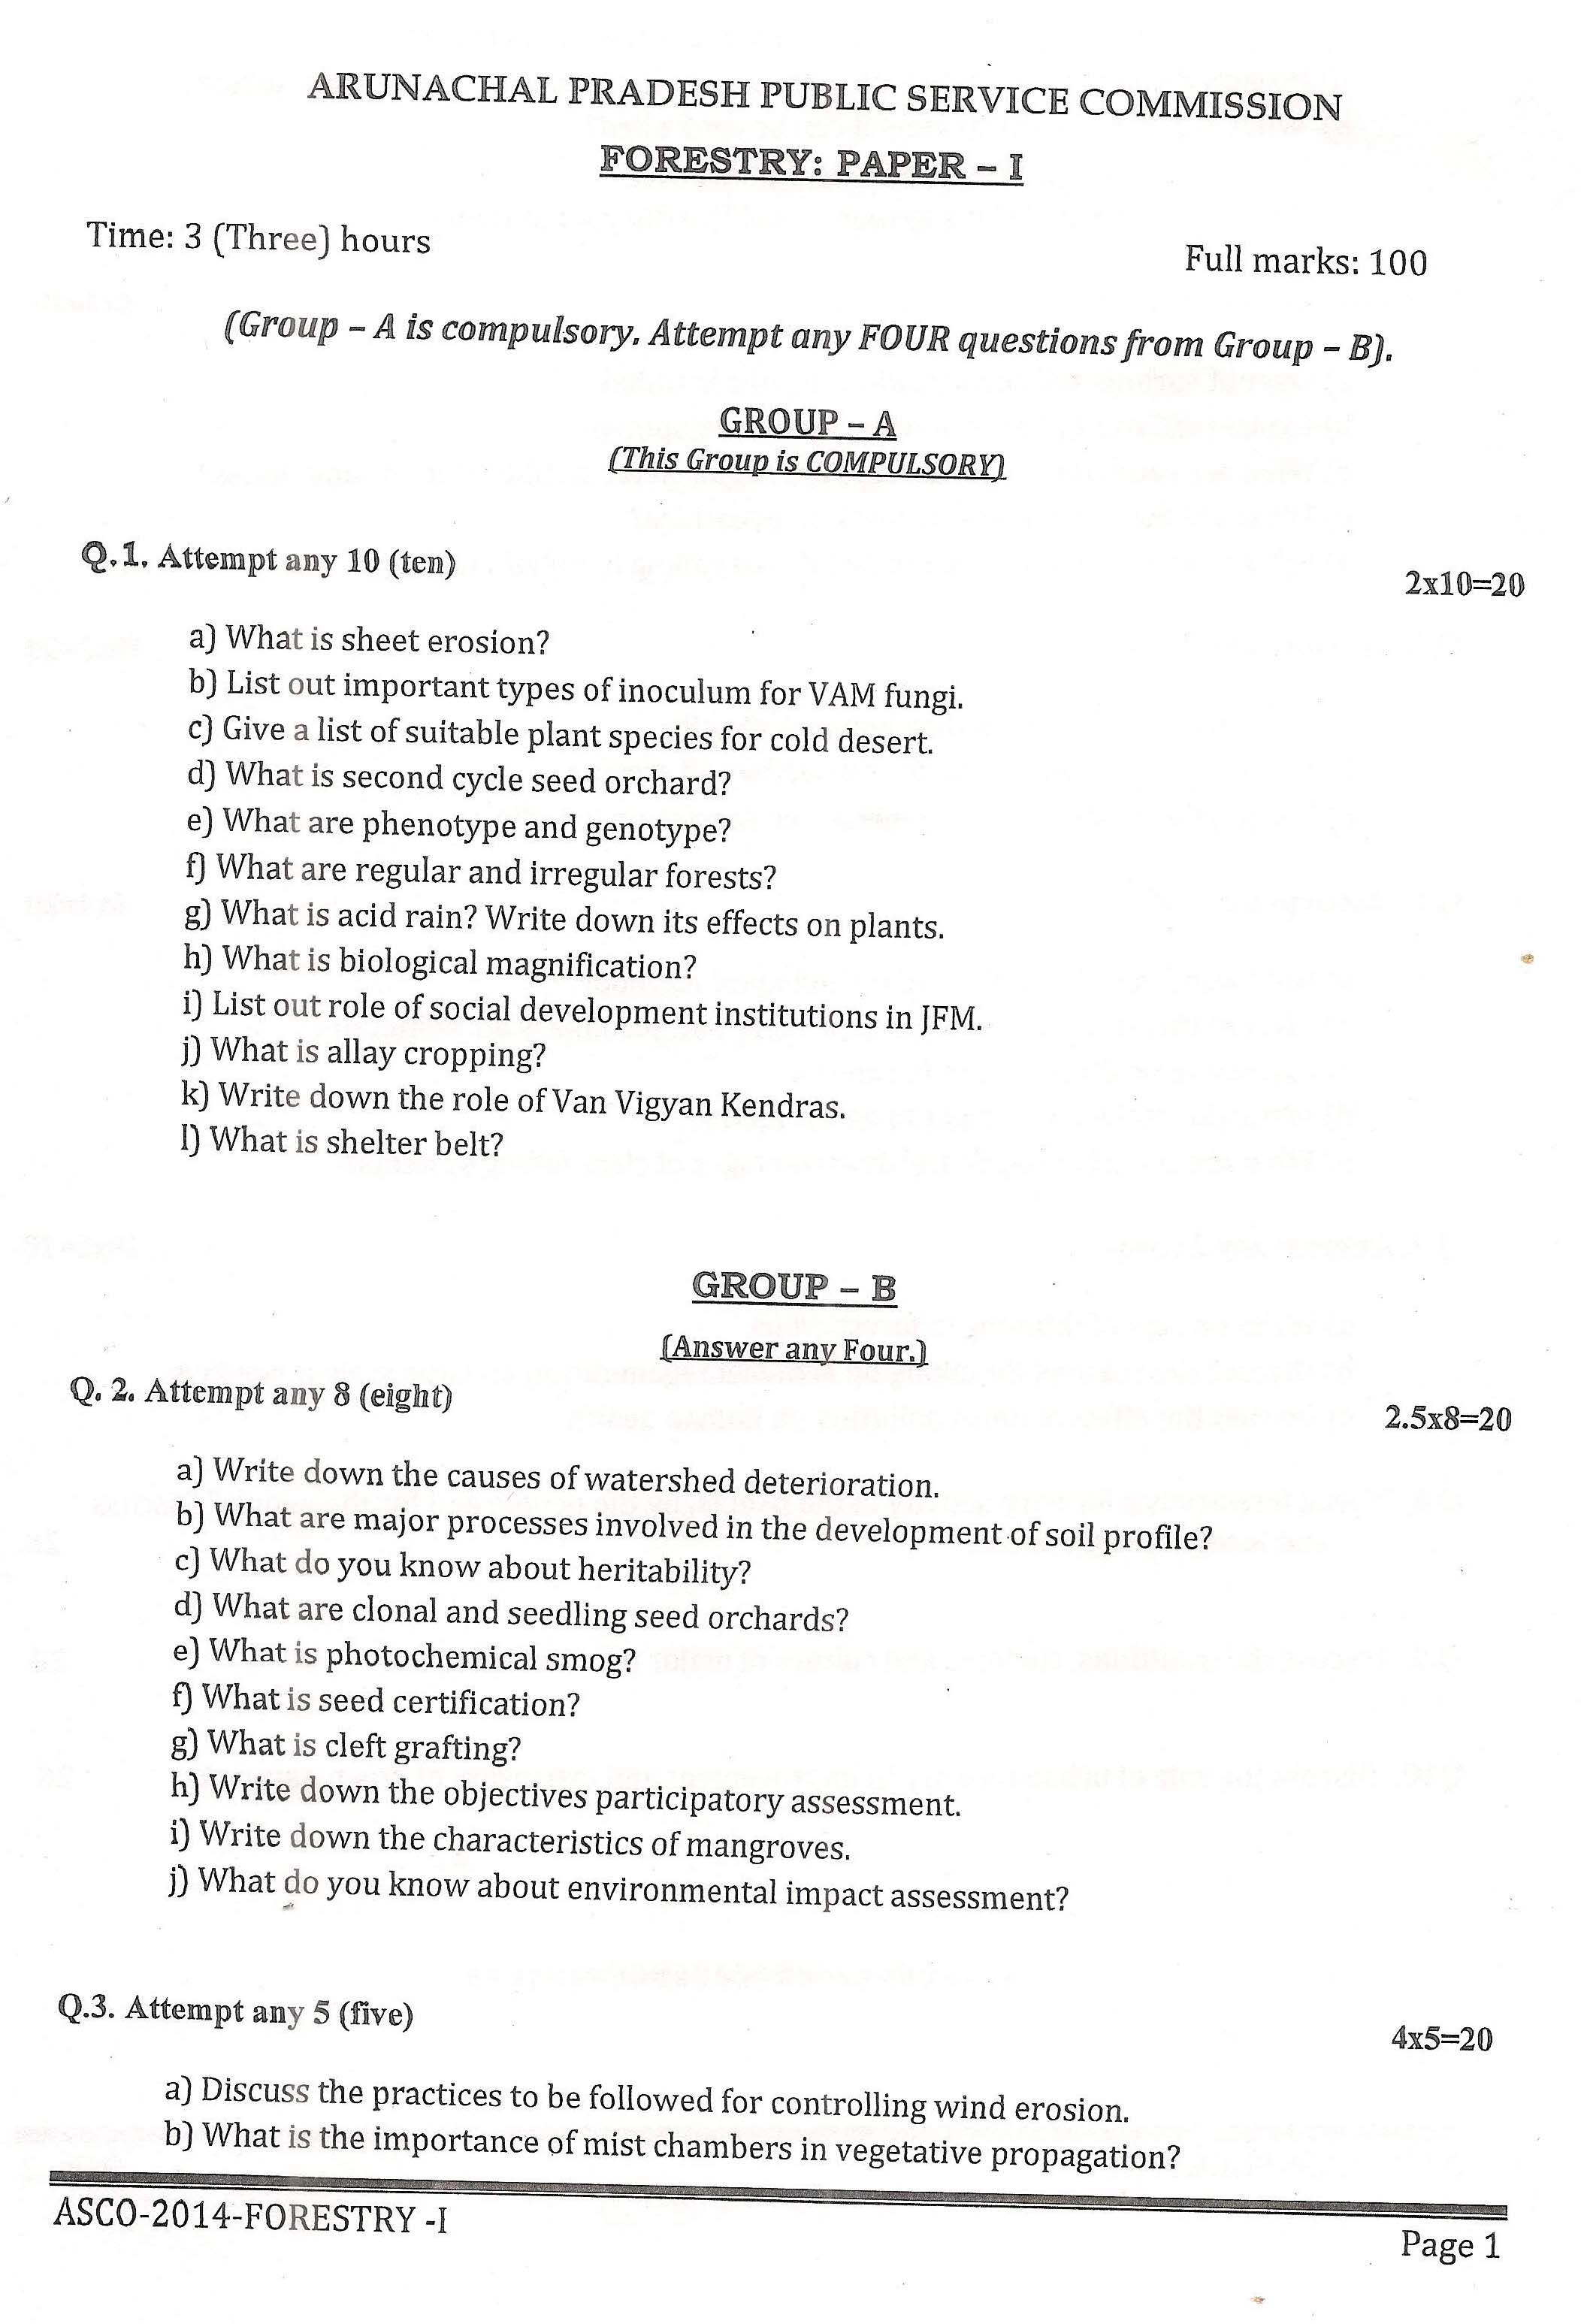 APPSC ASCO Forestry Paper I Exam Question Paper 2014 1